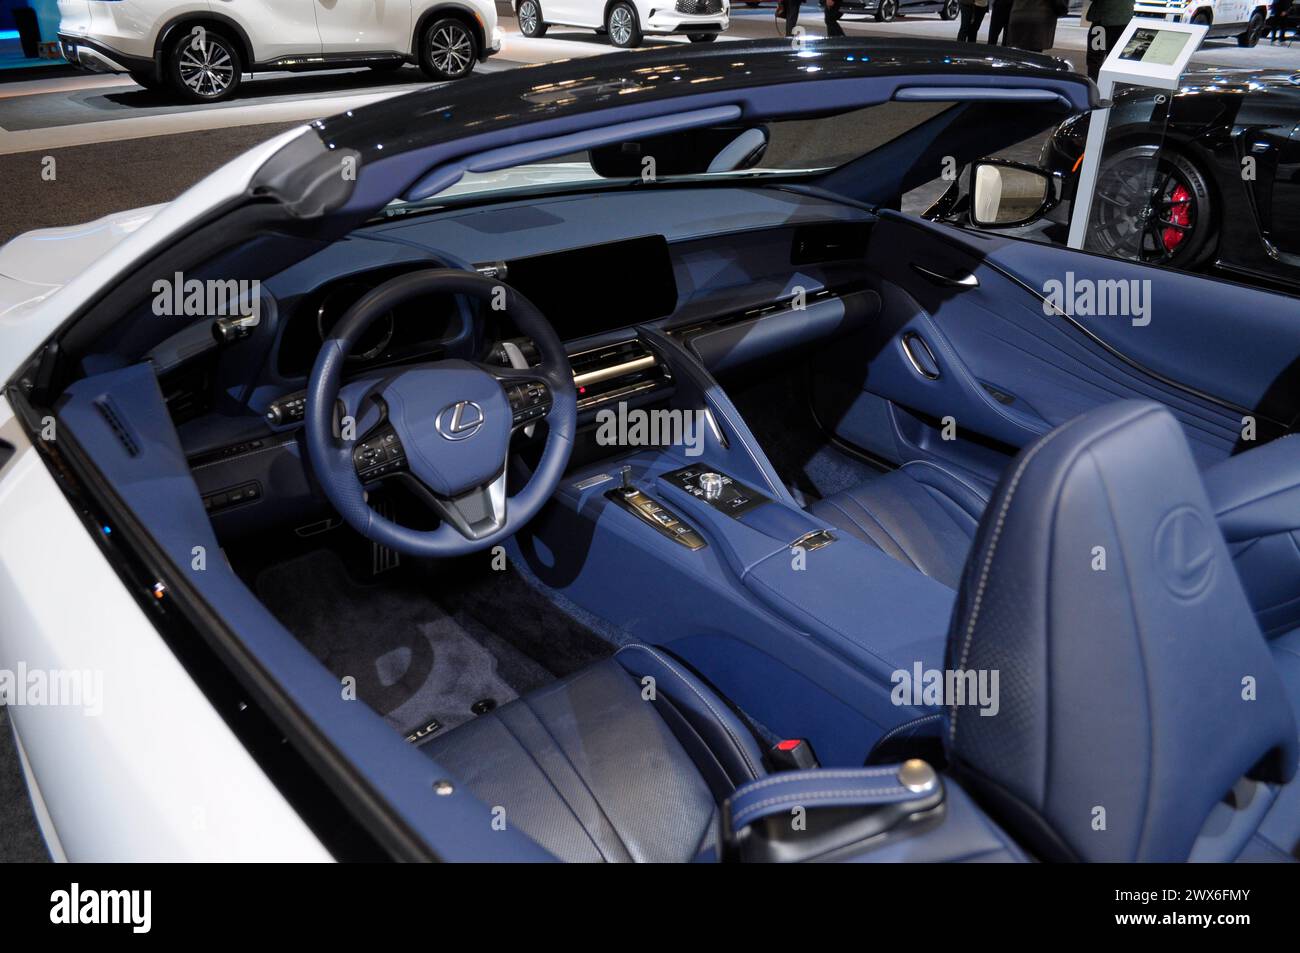 The interior of the Lexus LC 500 Convertible vehicle is seen on the first media day at the 2024 New York International Auto Show in the Jacob K. Javits Convention Center. The annual NYIAS in Manhattan, New York City featured various car companies, debuts of new vehicles and automobile industry professionals. The show which opens to the public on March 29 and ends on April 7, attracts thousands of car enthusiasts. The NYIAS began in 1900 showcasing automobiles and examples of future car technology. (Photo by Jimin Kim/SOPA Images/Sipa USA) Stock Photo